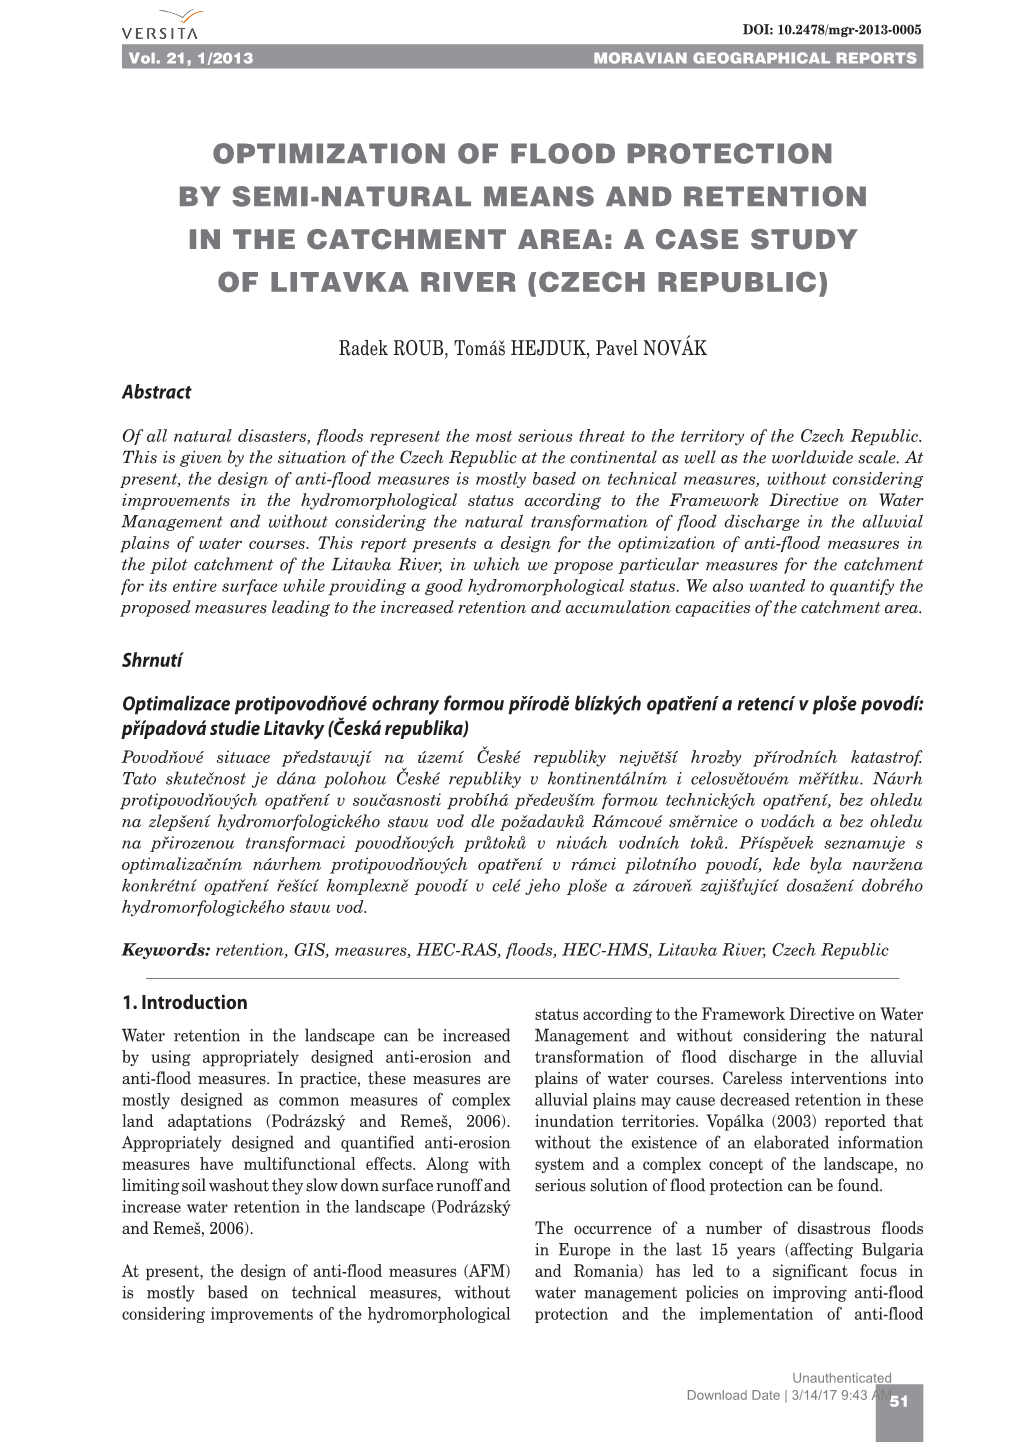 Optimization of Flood Protection by Semi-Natural Means and Retention in the Catchment Area: a Case Study of Litavka River (Czech Republic)